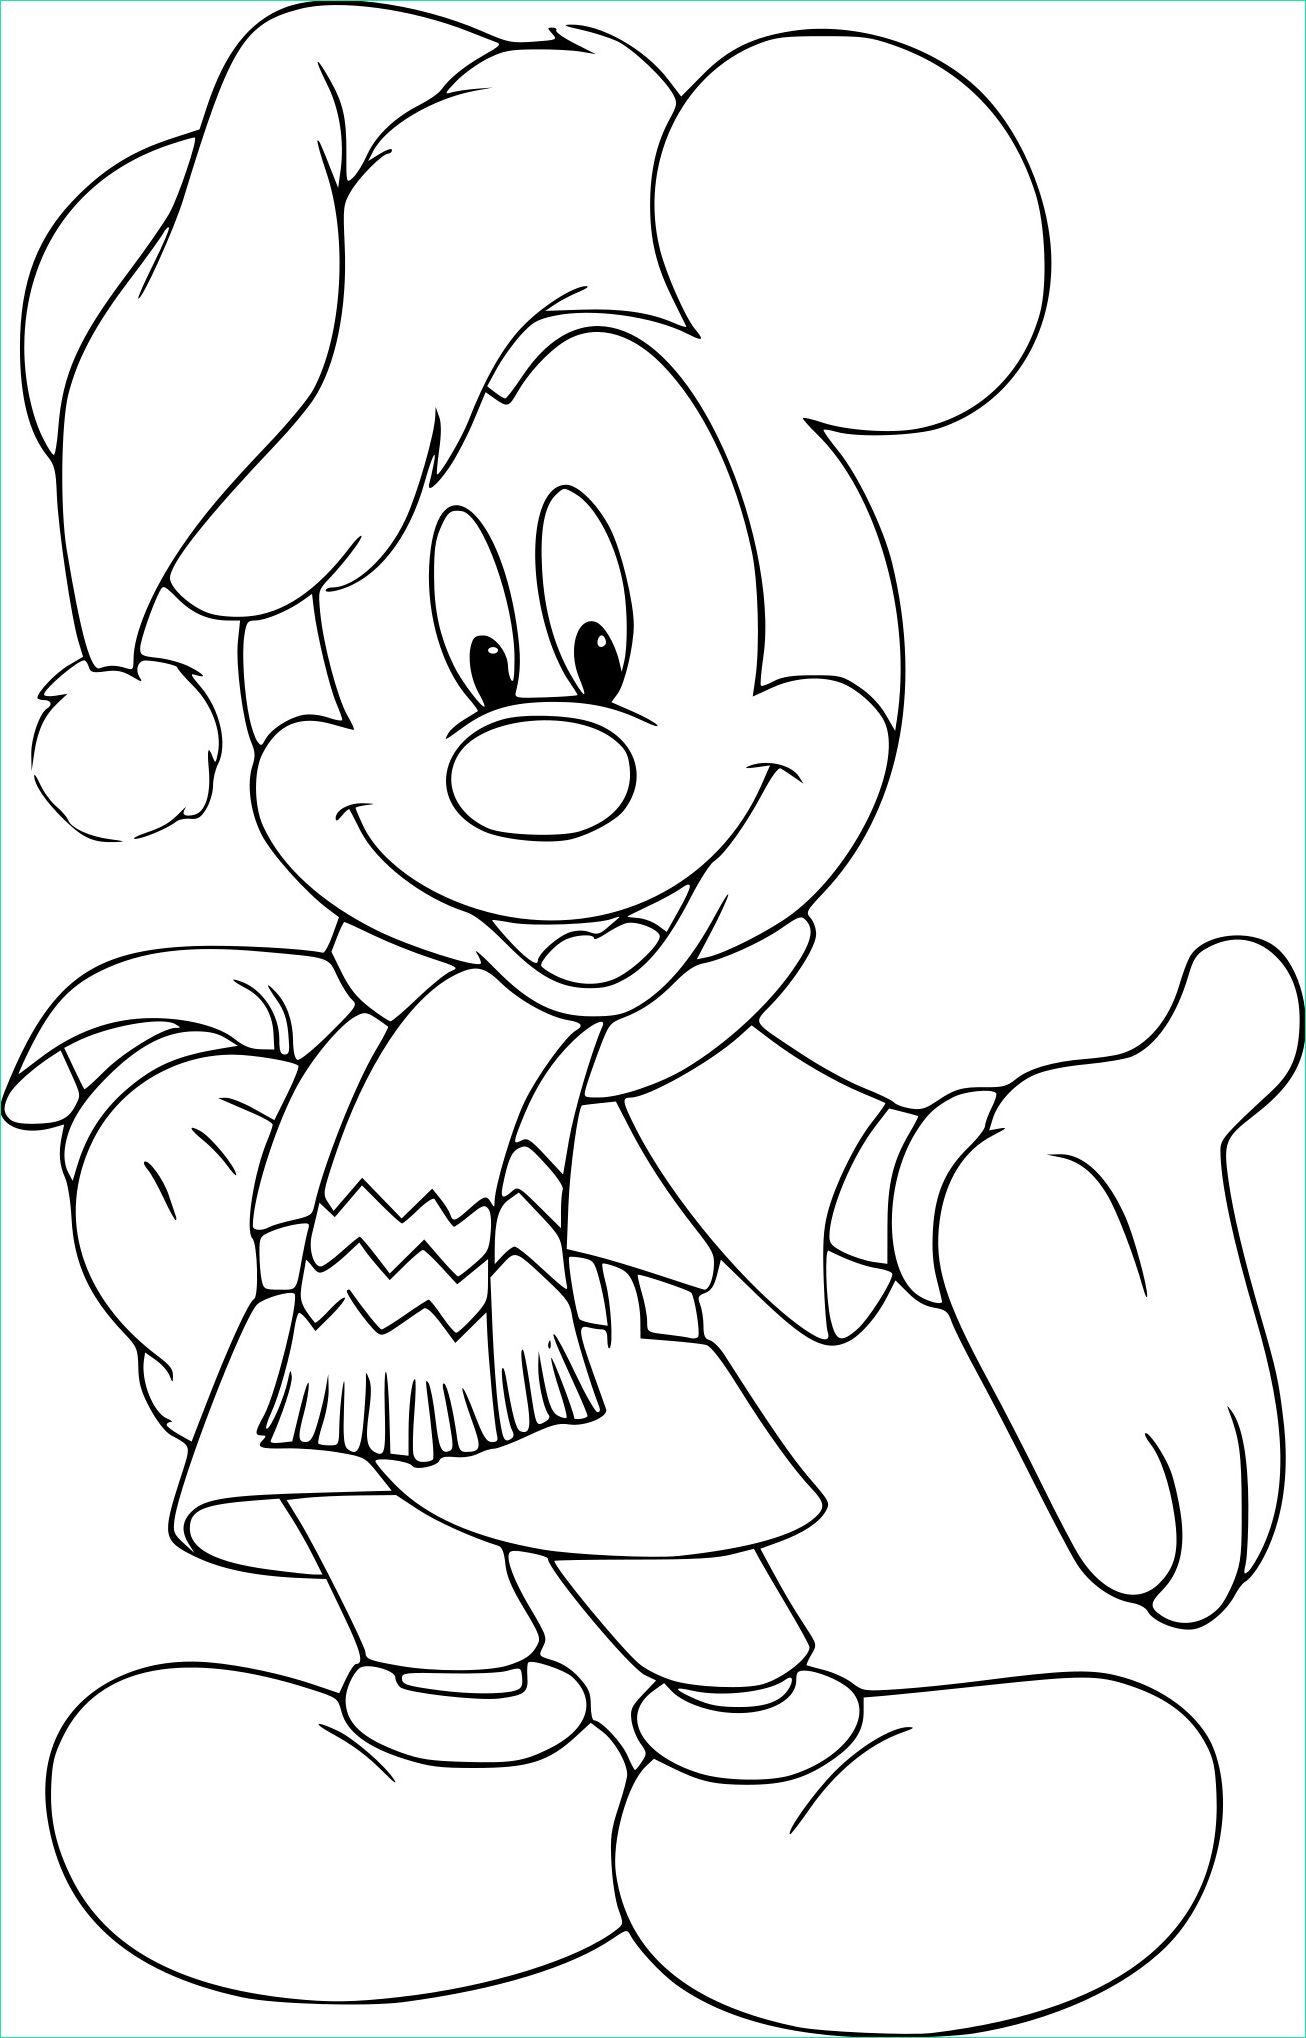 Coloriage Mikey Bestof Galerie View Coloriage Imprimer Mickey Png Malvorlagen Fur